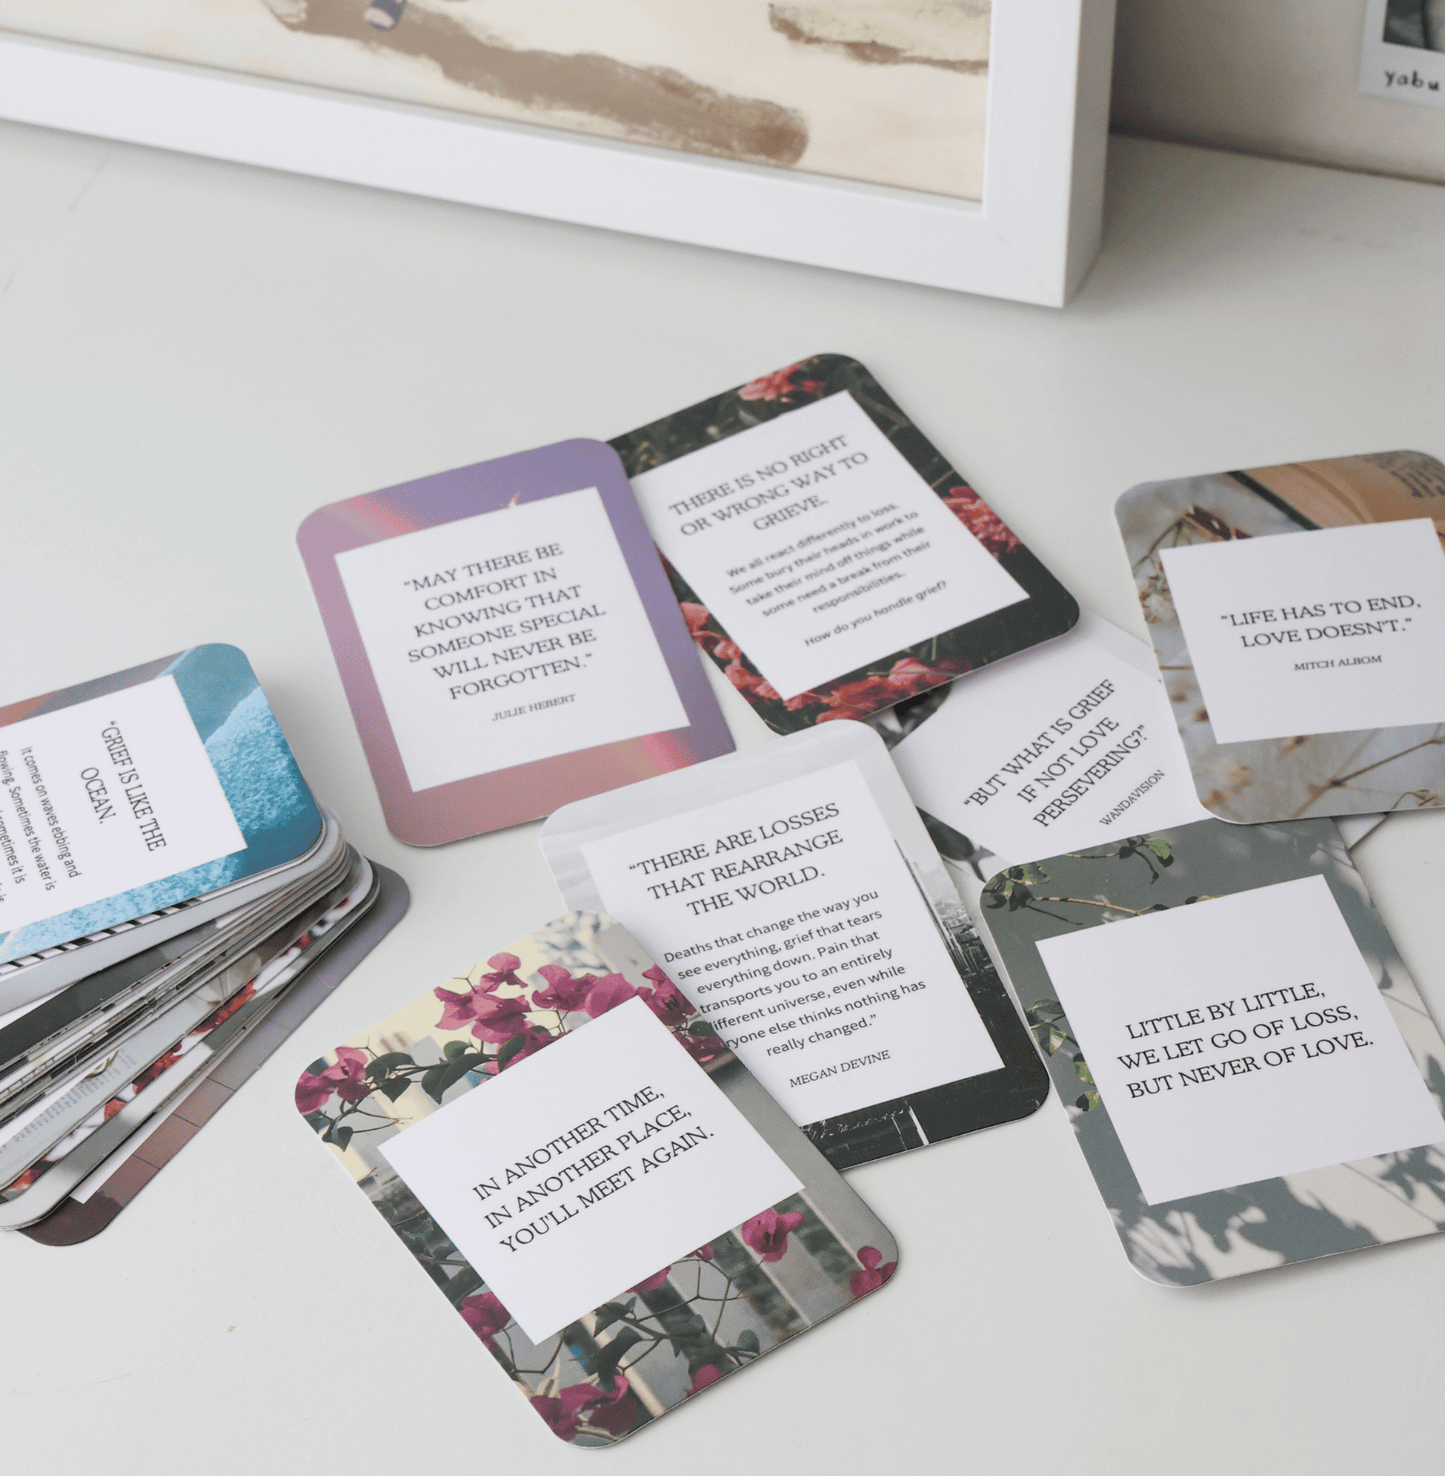 My Mourning Heart Cards: 30 Cards with Messages of Comfort and Affirmation for Grief and Loss